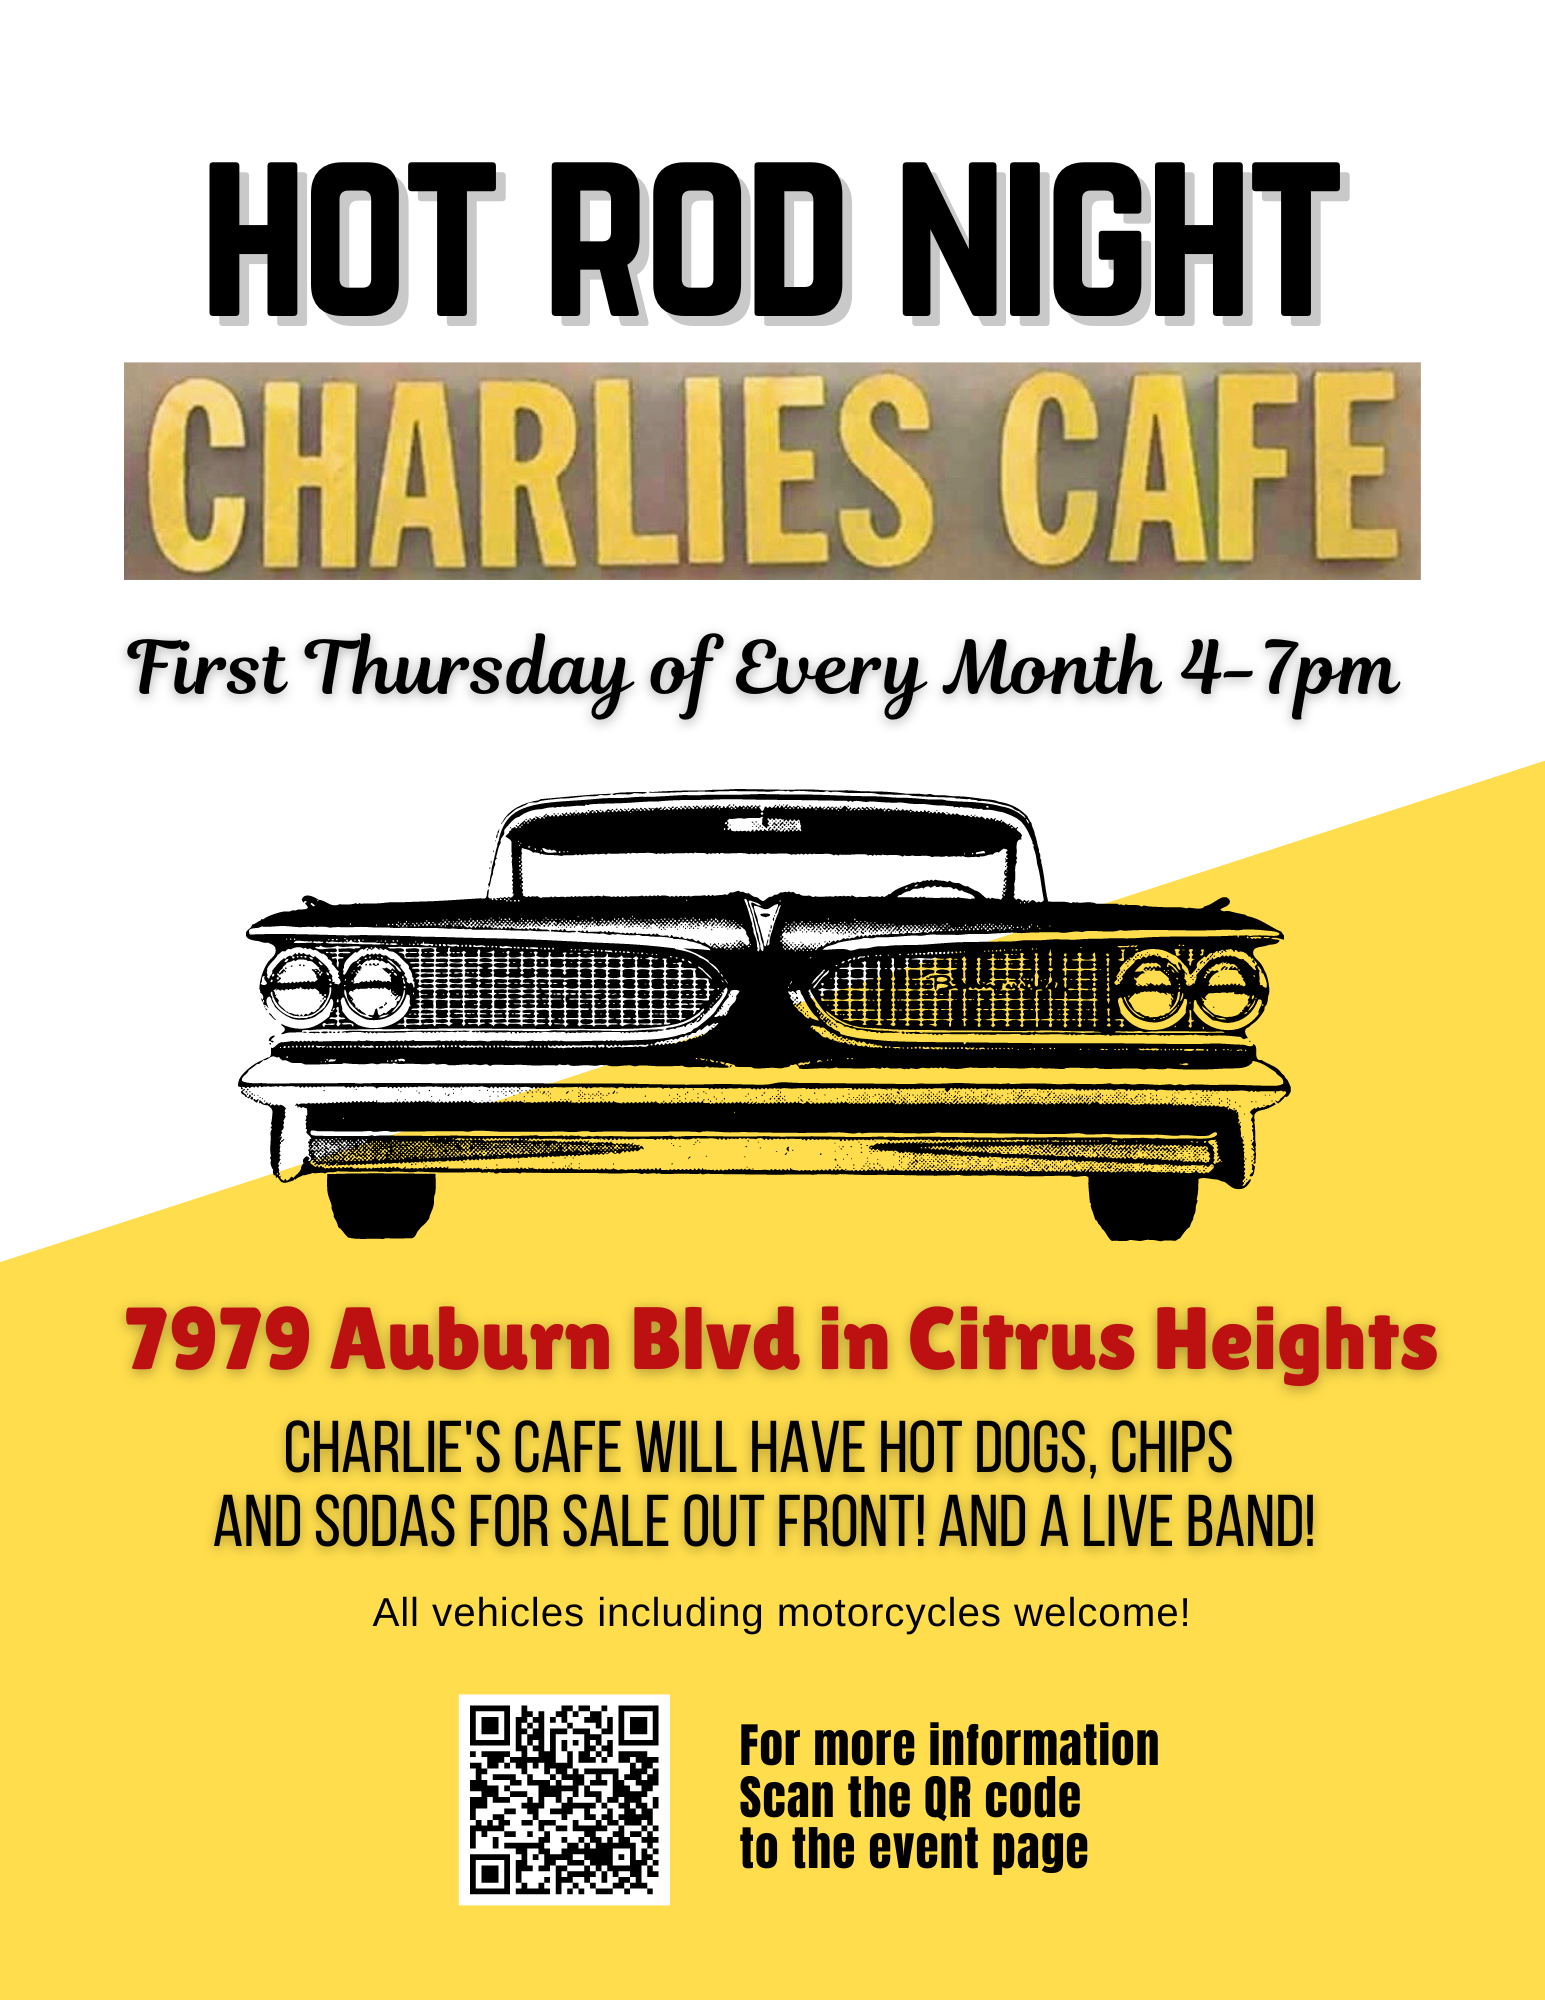 Hot Rod Night at Charlie's Cafe